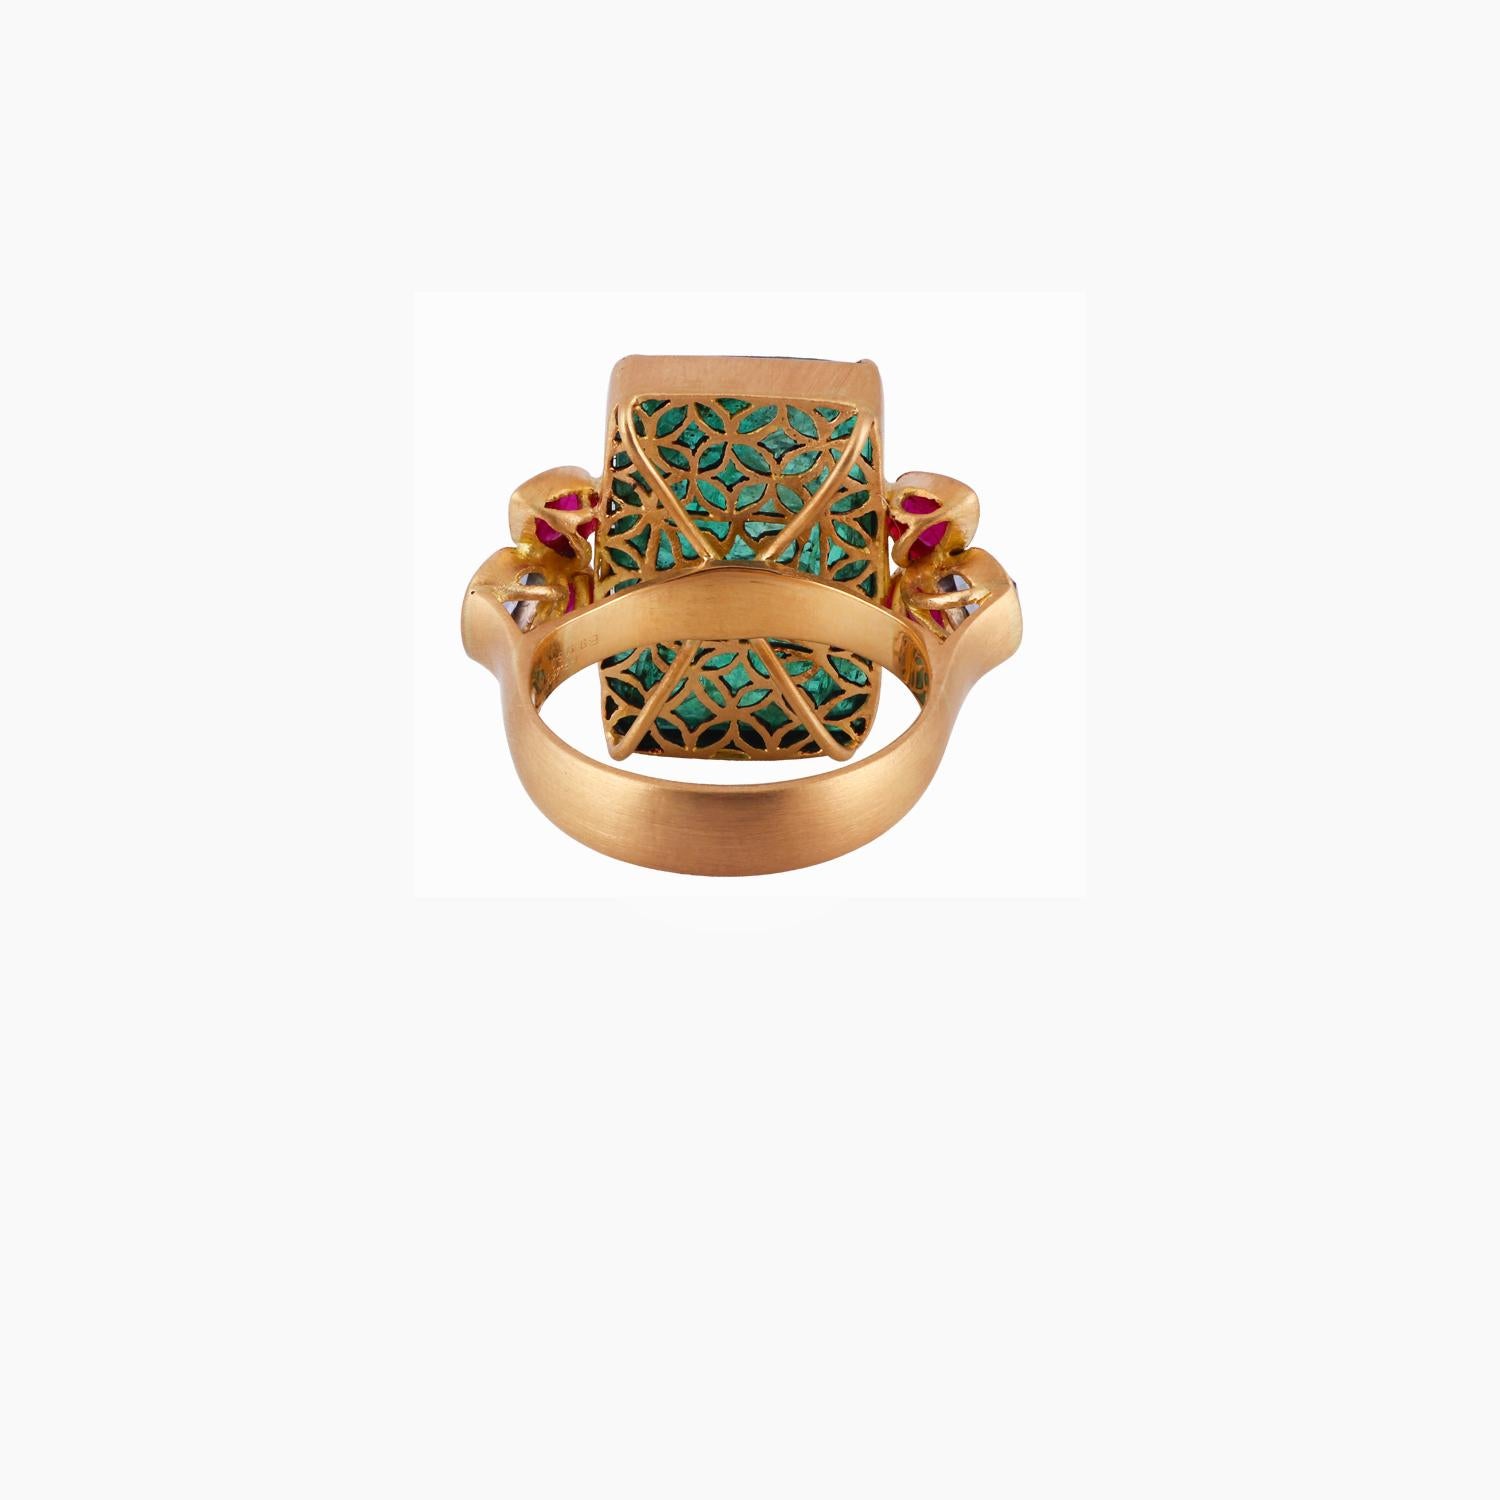 Contemporary 9.41 Carat Carved Zambian Emerald, Sapphire & Ruby Ring in 18k Yellow Gold For Sale